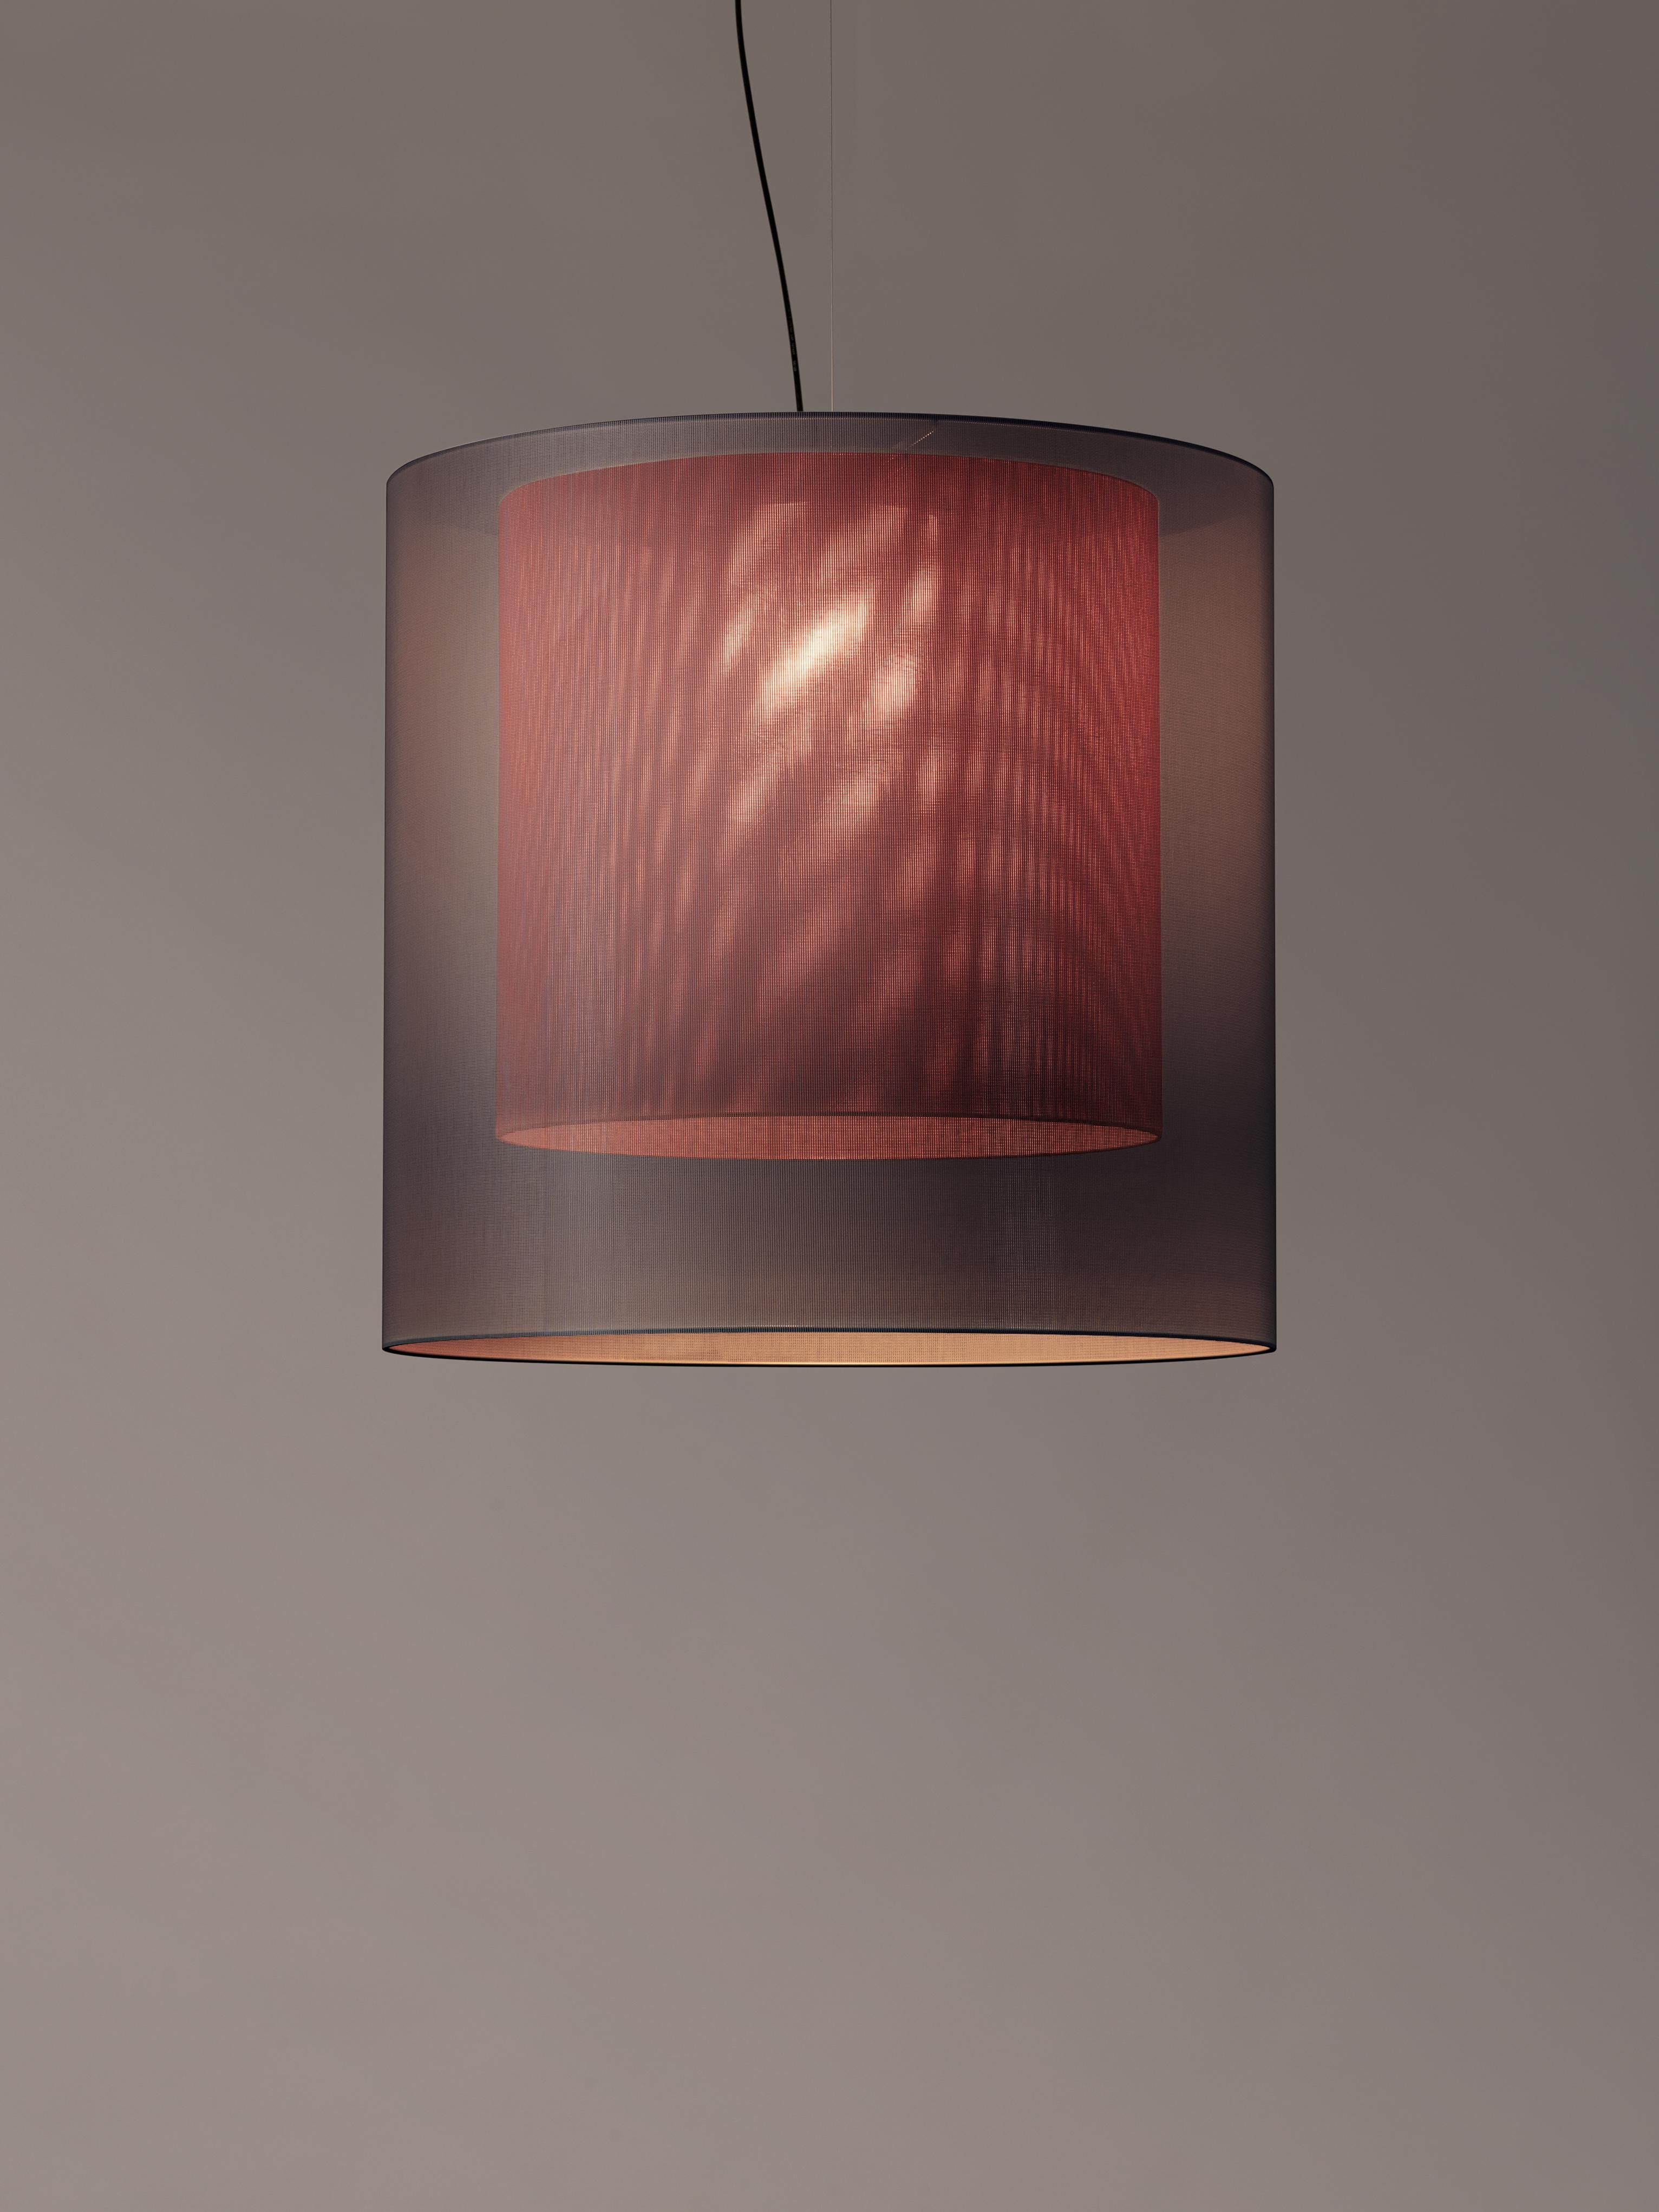 Grey and red moaré XL pendant lamp by Antoni Arola
Dimensions: D 83 x H 81 cm.
Materials: Metal, polyester.
Available in other colors and sizes.

Moaré’s multiple combinations of formats and colours make it highly versatile. The series takes